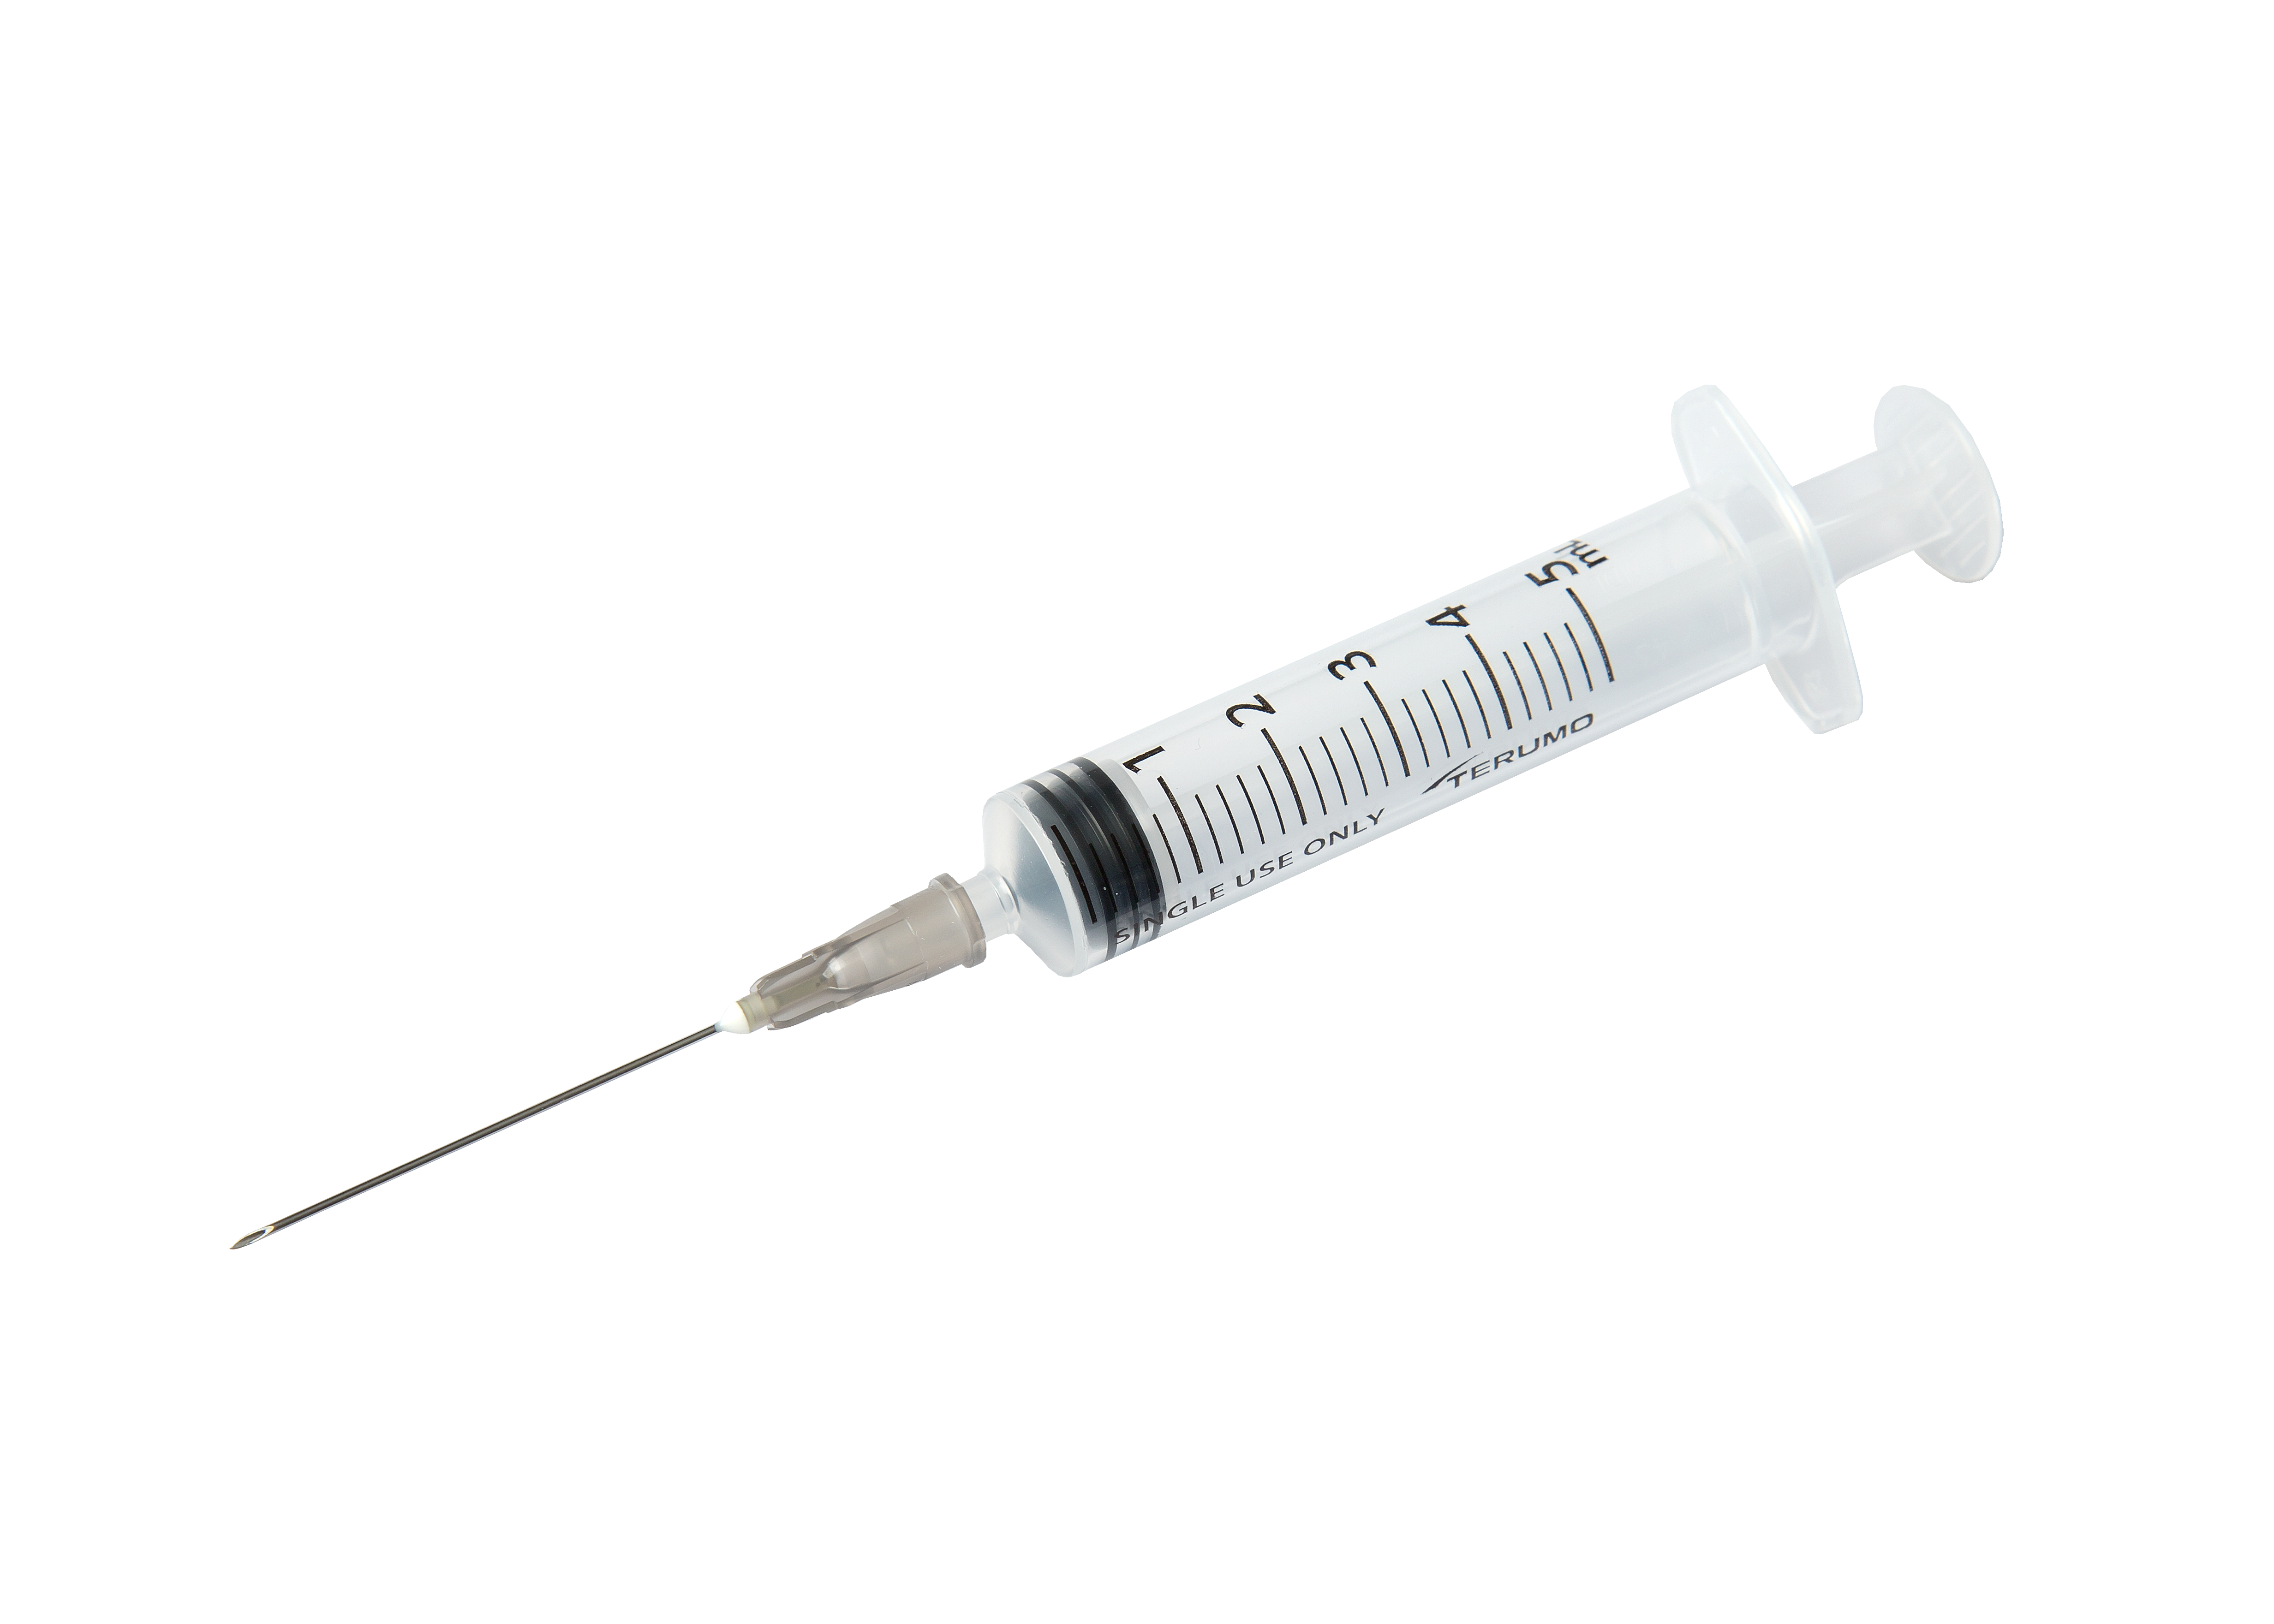 Syringe with needle 3-part syringe with pre-connected hypodermic